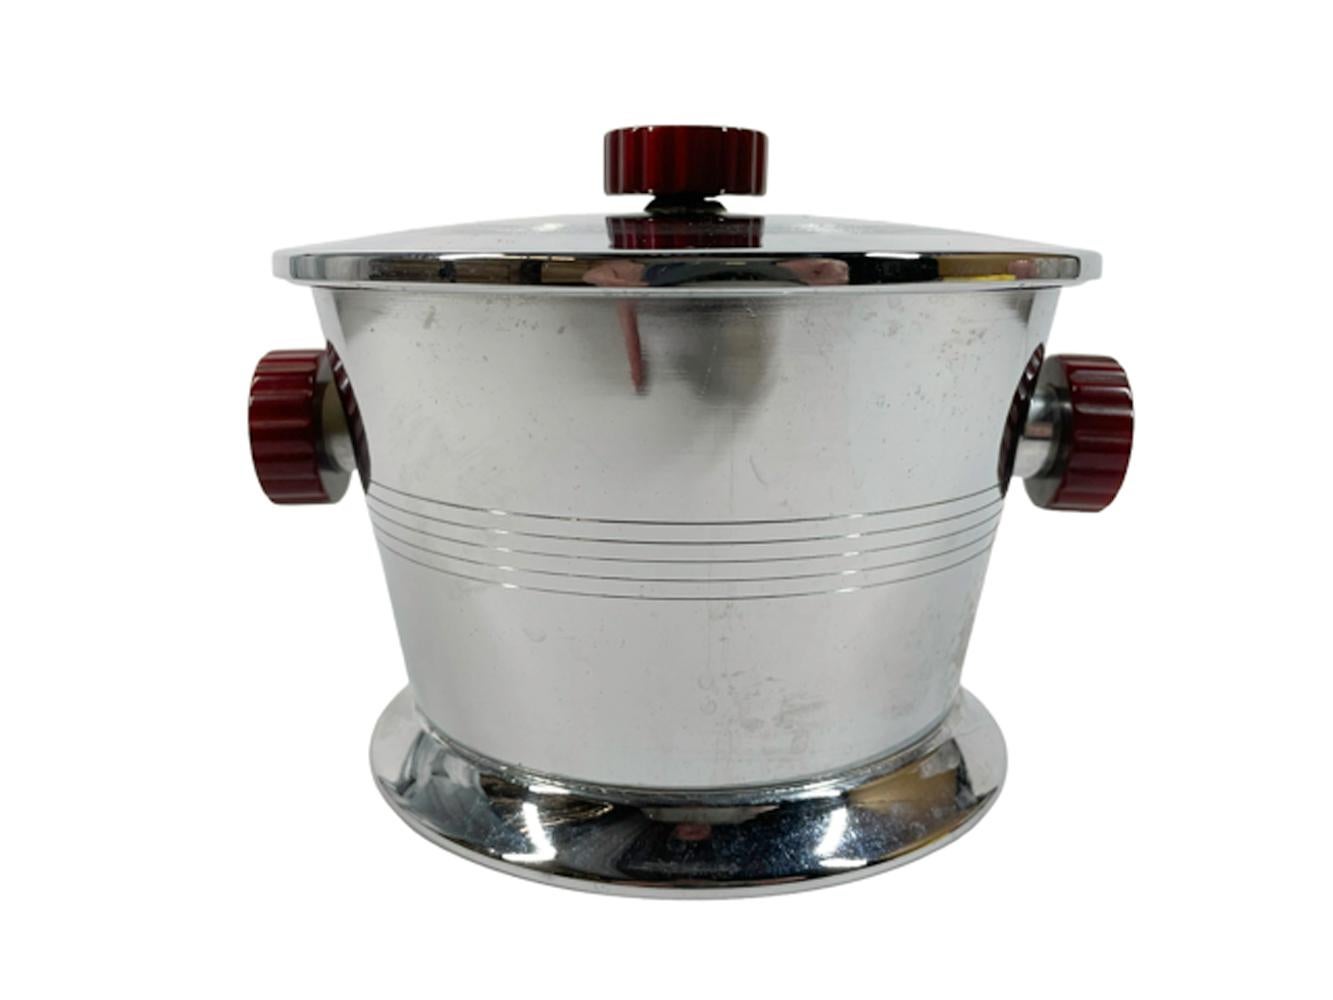 Vintage Glo-Hill lidded ice bucket in chrome with mottled red and black faux tortoiseshell Bakelite handles.